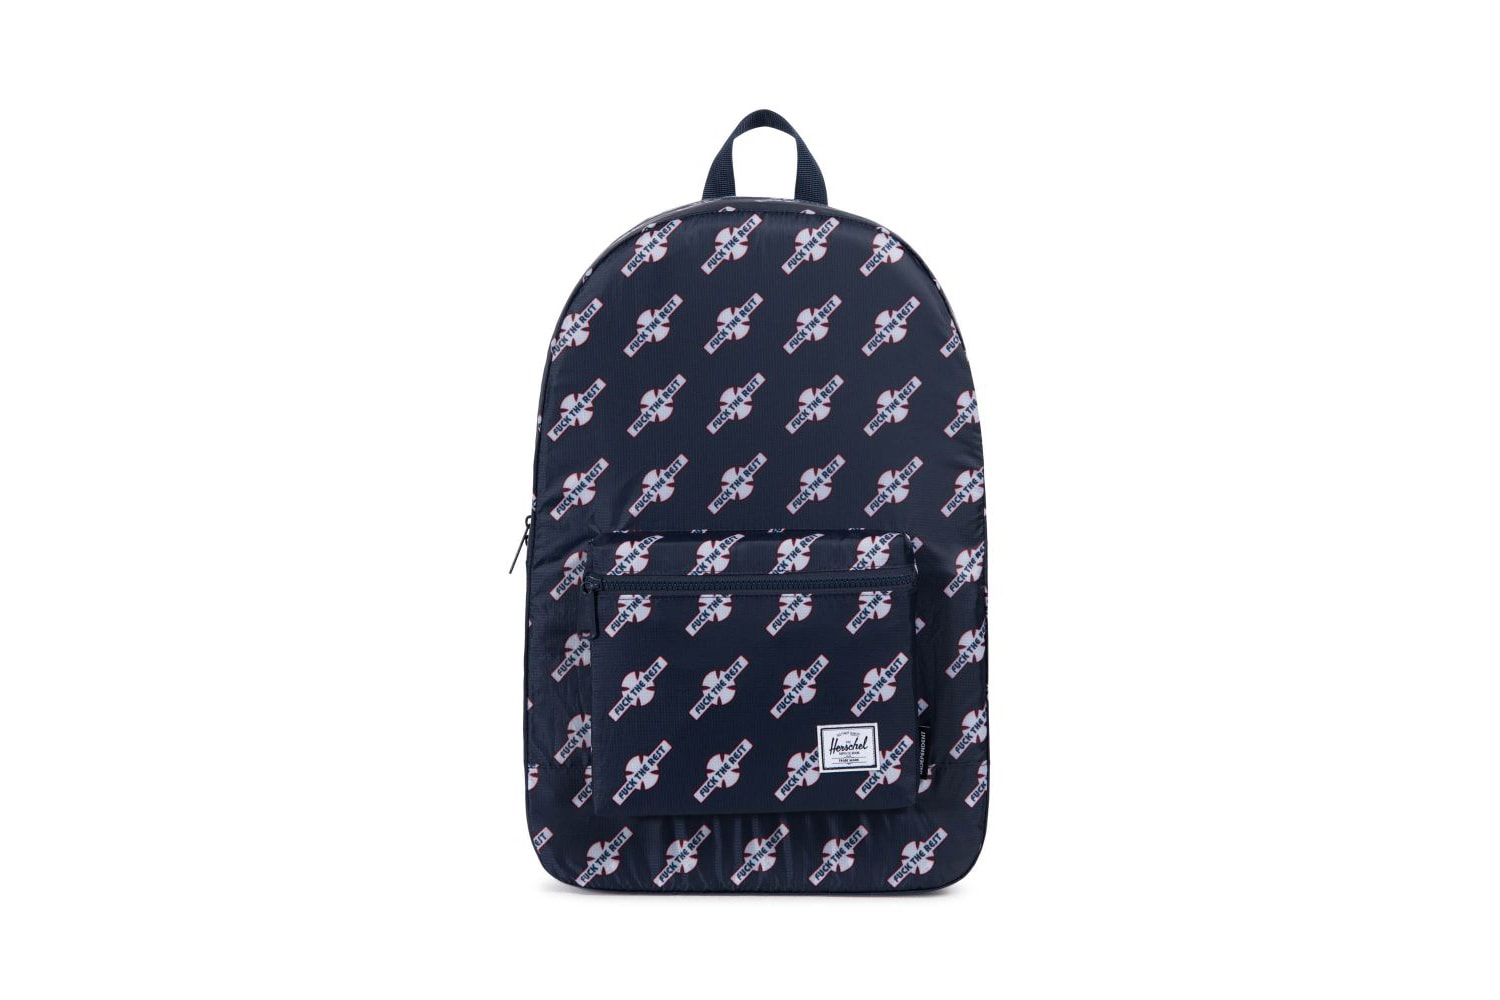 Herschel Supply Co. Independent Truck Company Fuck The Rest Collection Bags Fall Winter 2017